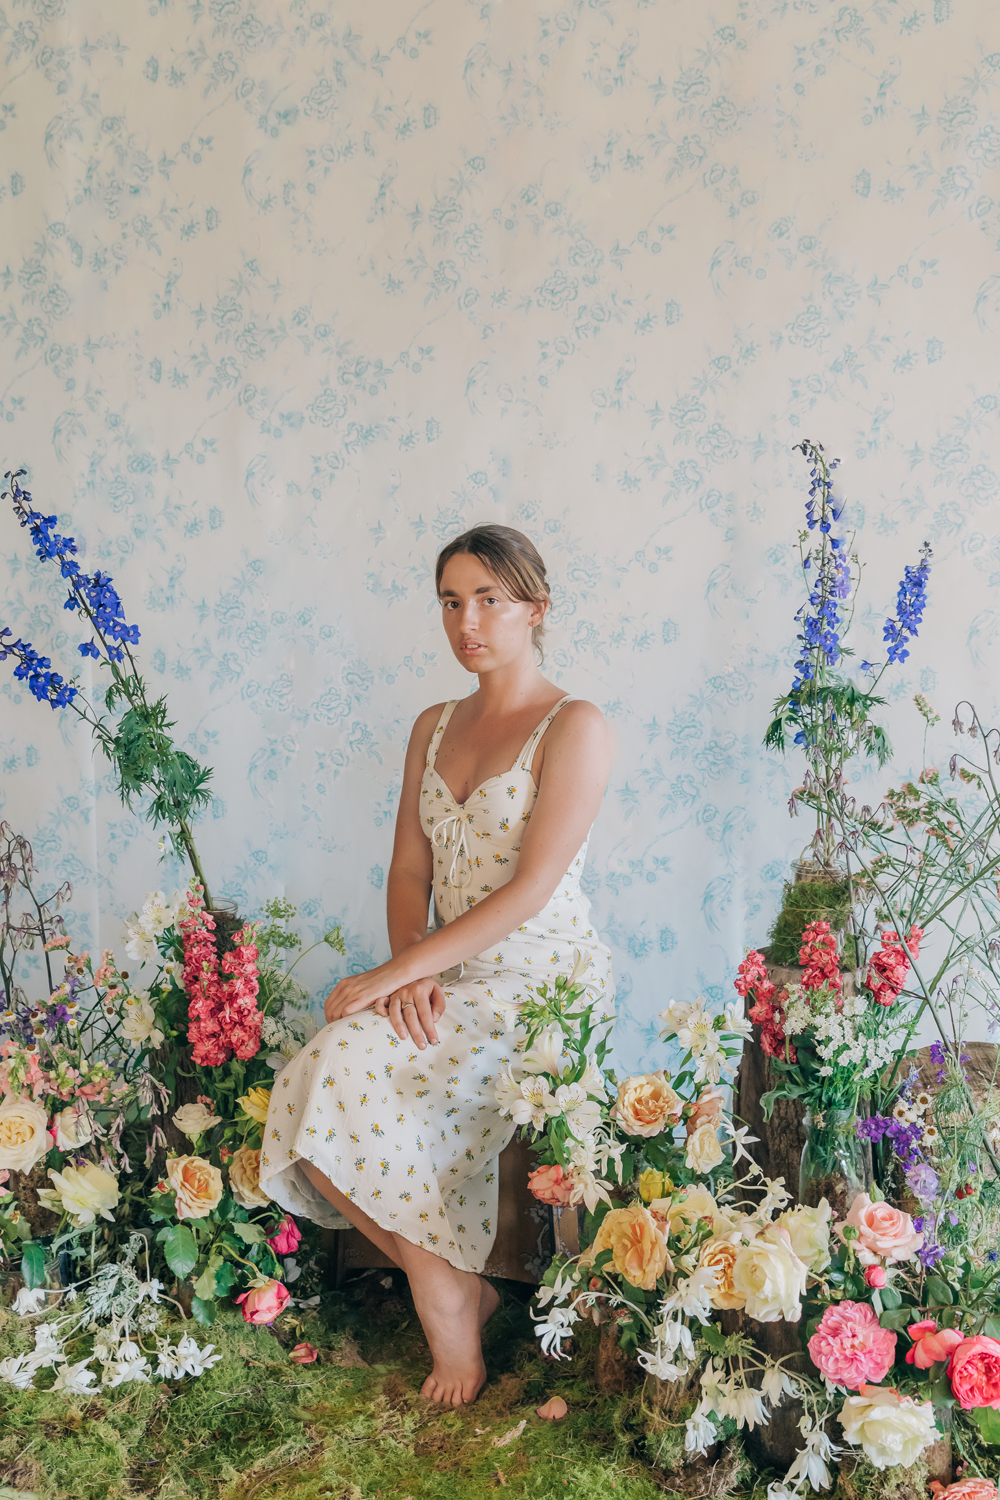 Colour photograph of a portrait of a young woman, in a floral dress sitting amongst greenery and an array of flowers. 